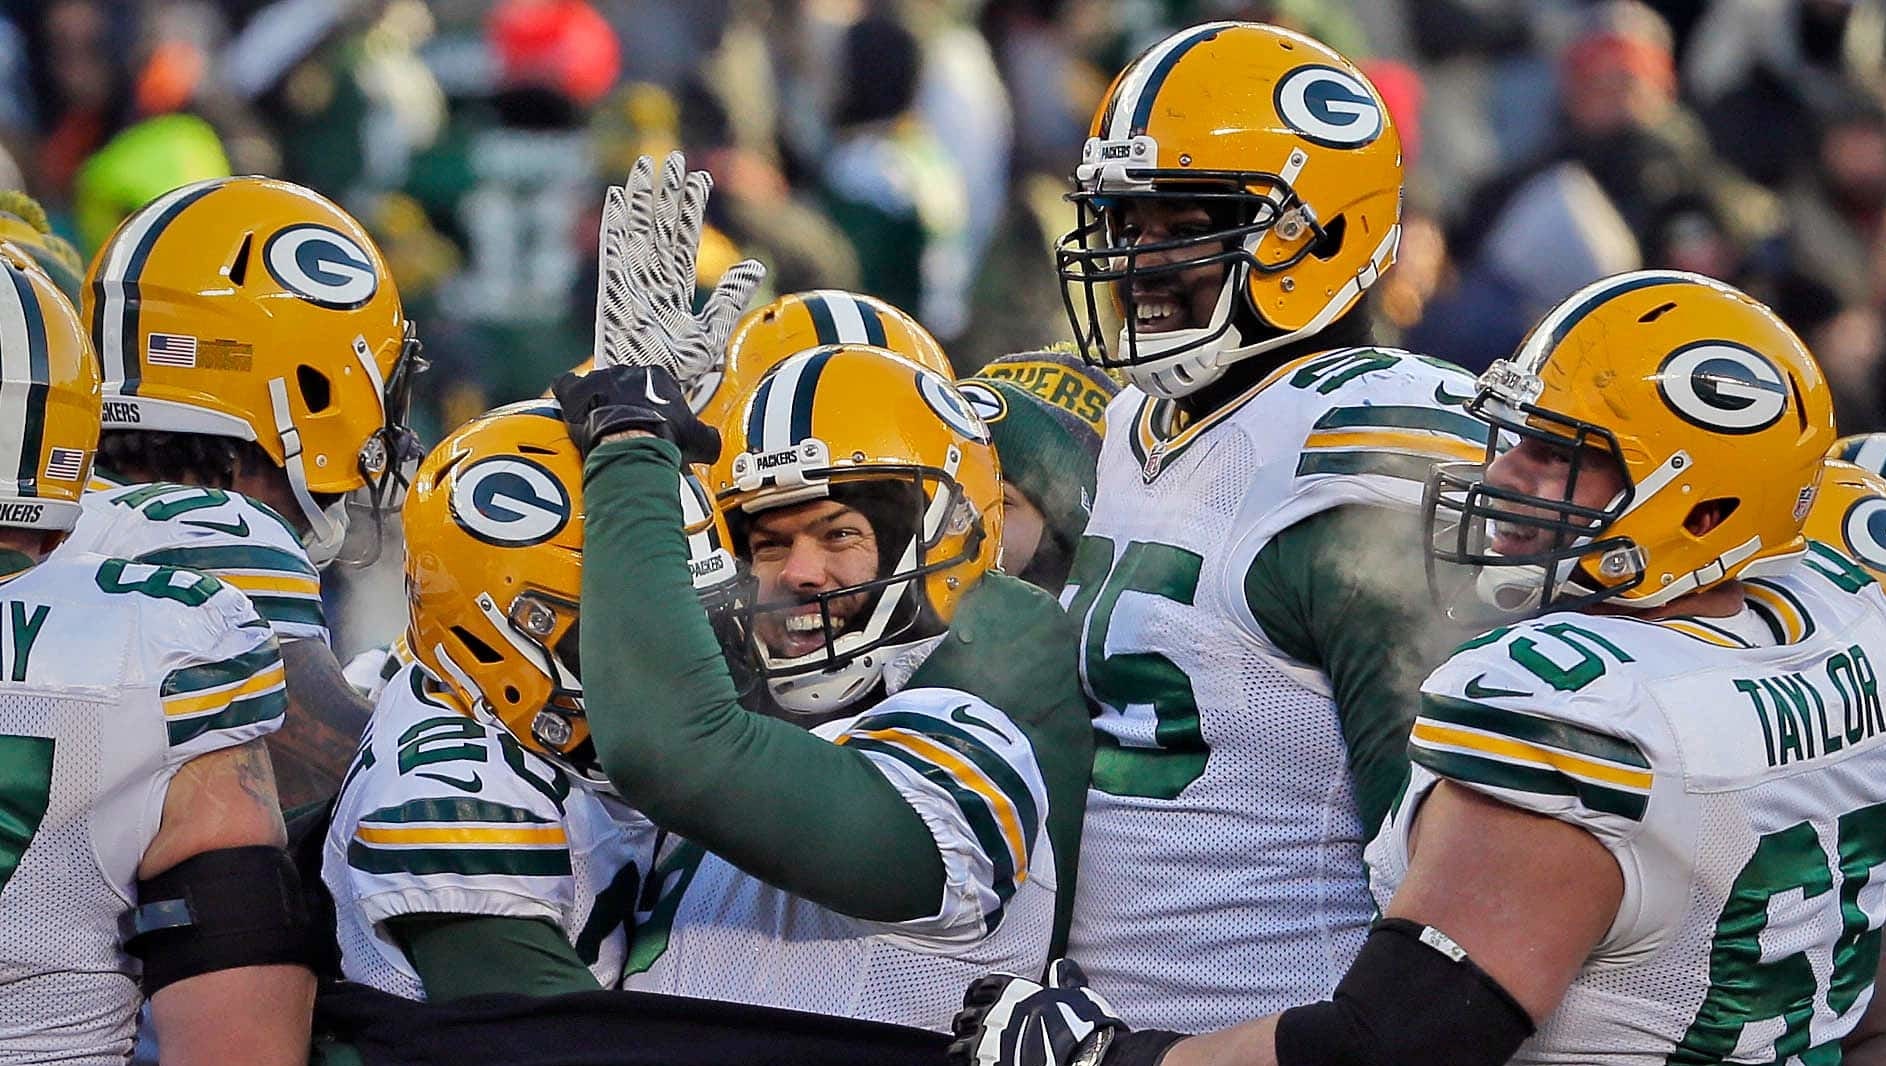 Mason Crosby (2) is surrounded by teammates after hitting a 32-yard field goal with 3 seconds left in the game to give the Green Bay Packers a 30-27 win over the Chicago Bears on Dec. 18, 2016.